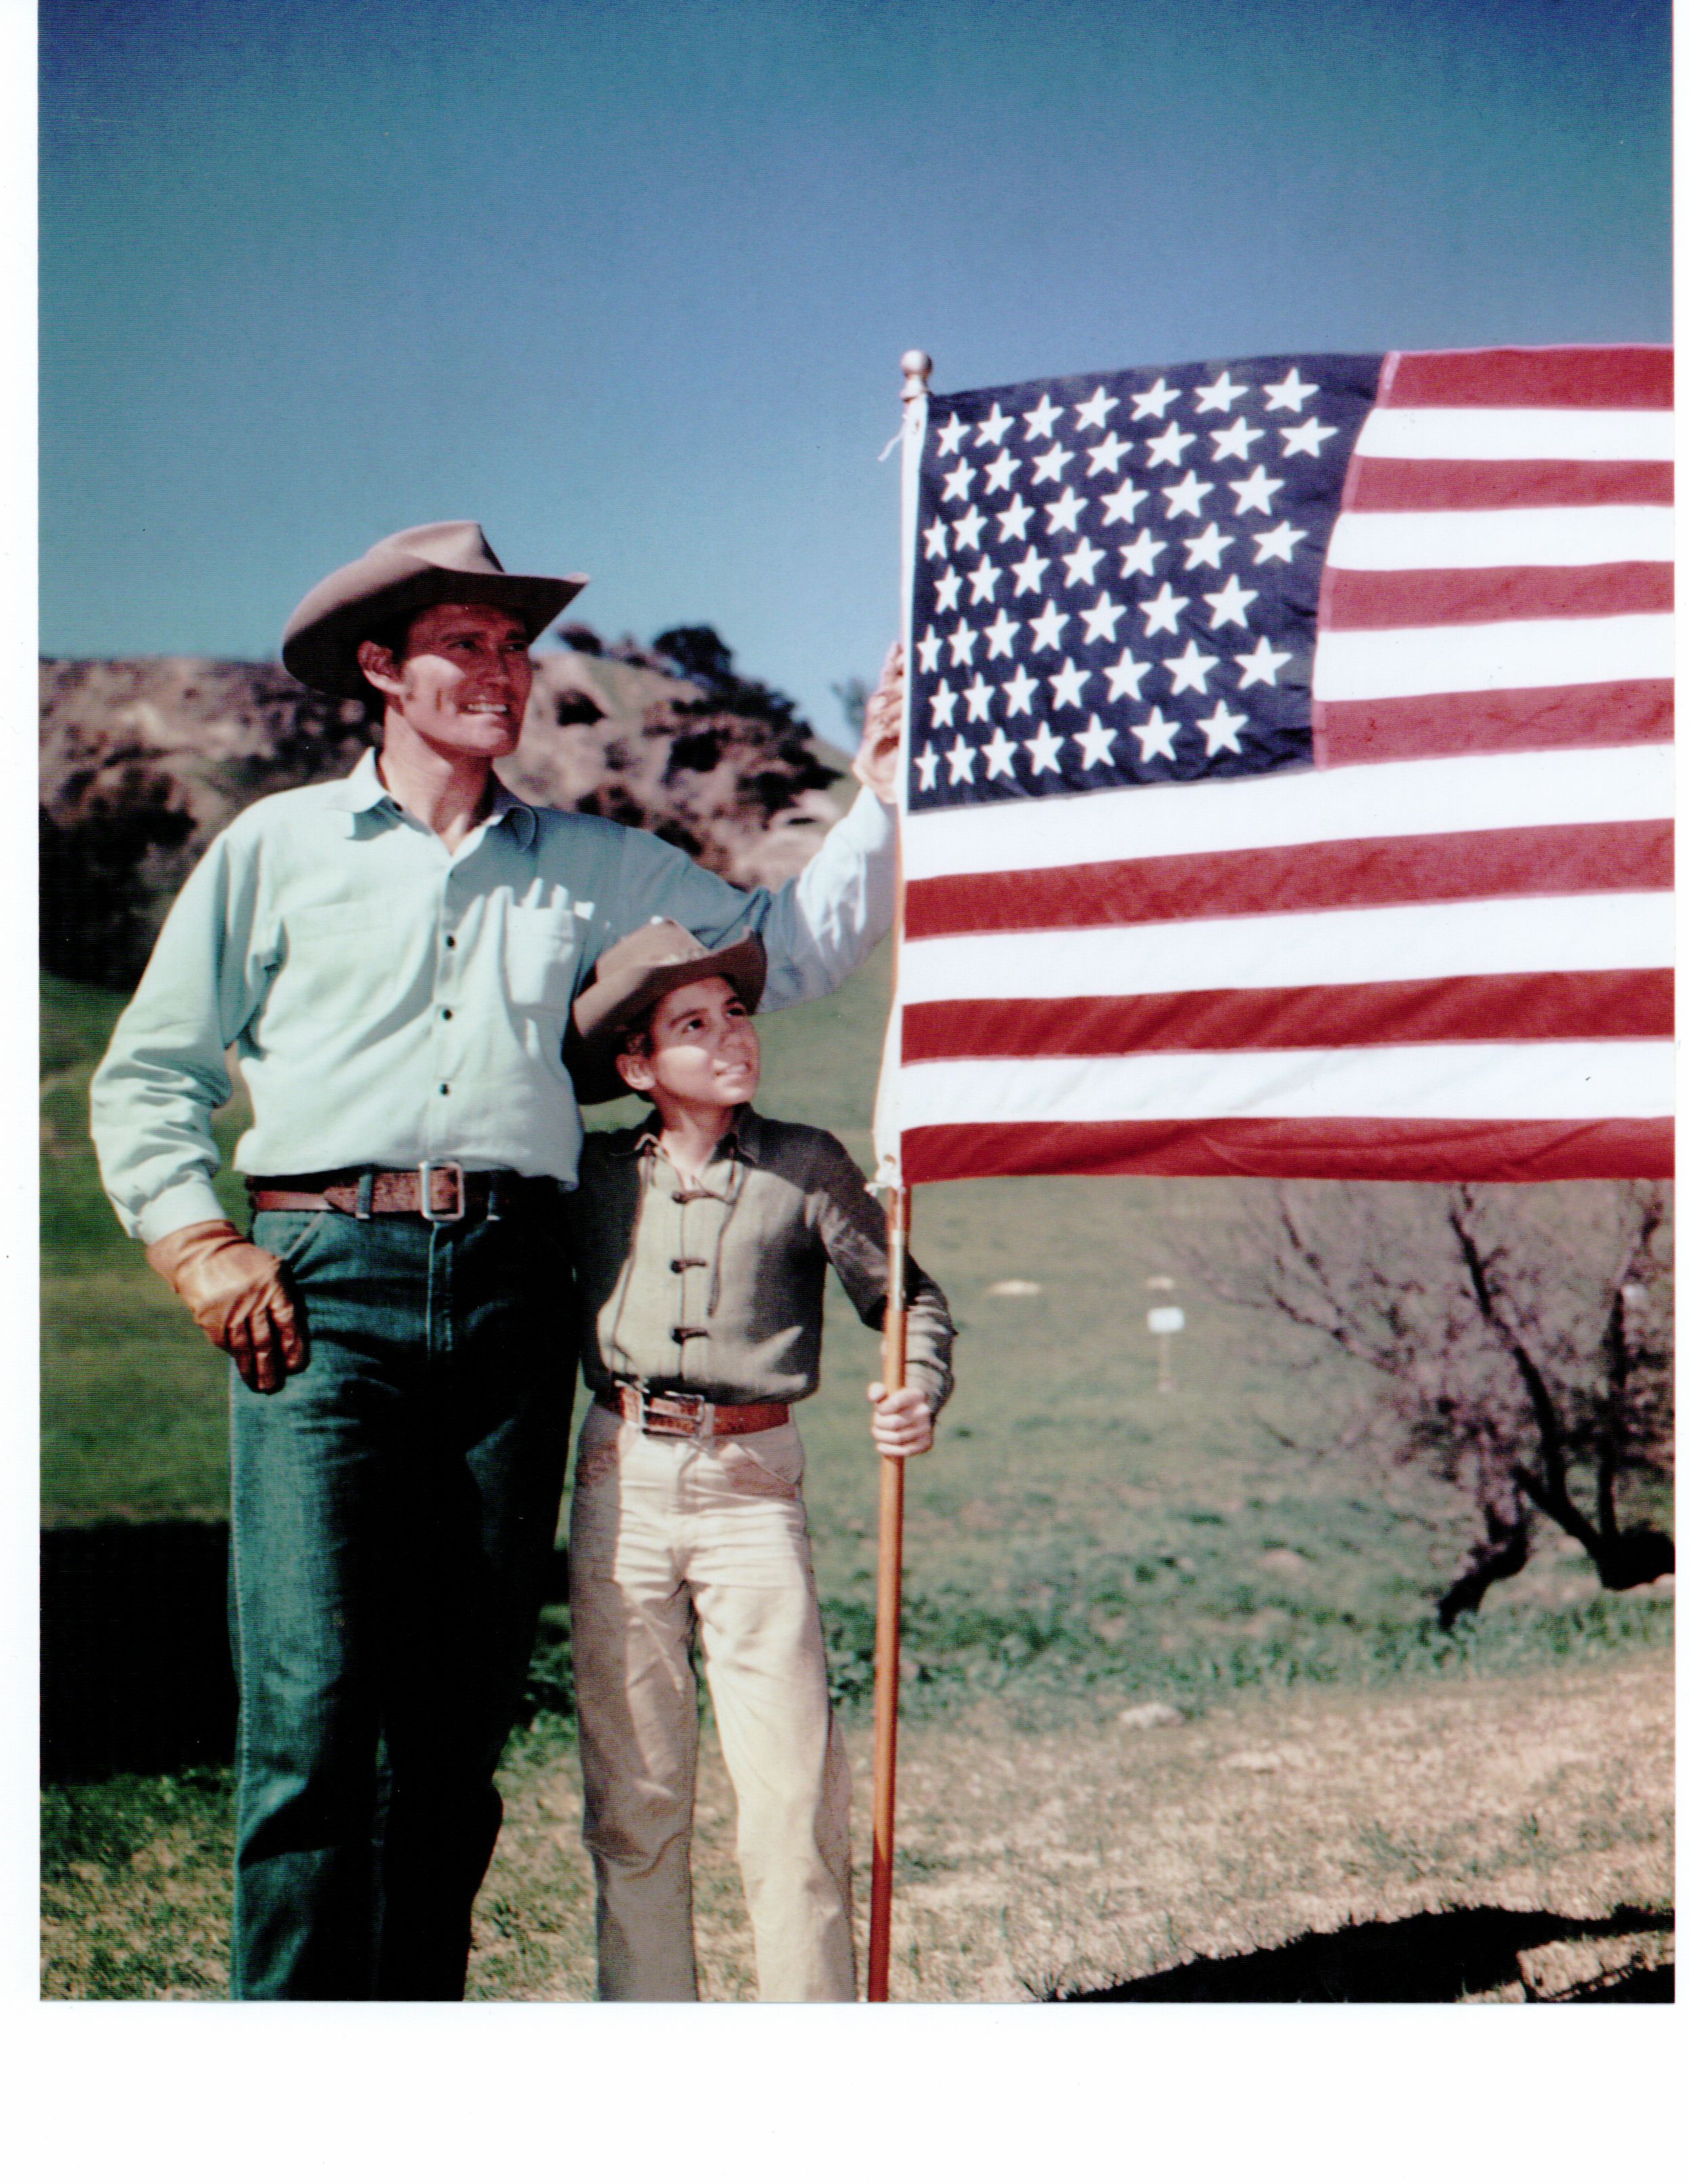 Chuck Connors and Johnny Crawford display the new 49-Star Flag after Alaska was formally granted statehood on January 3, 1959 - stars were arranged in seven rows of seven stars each.